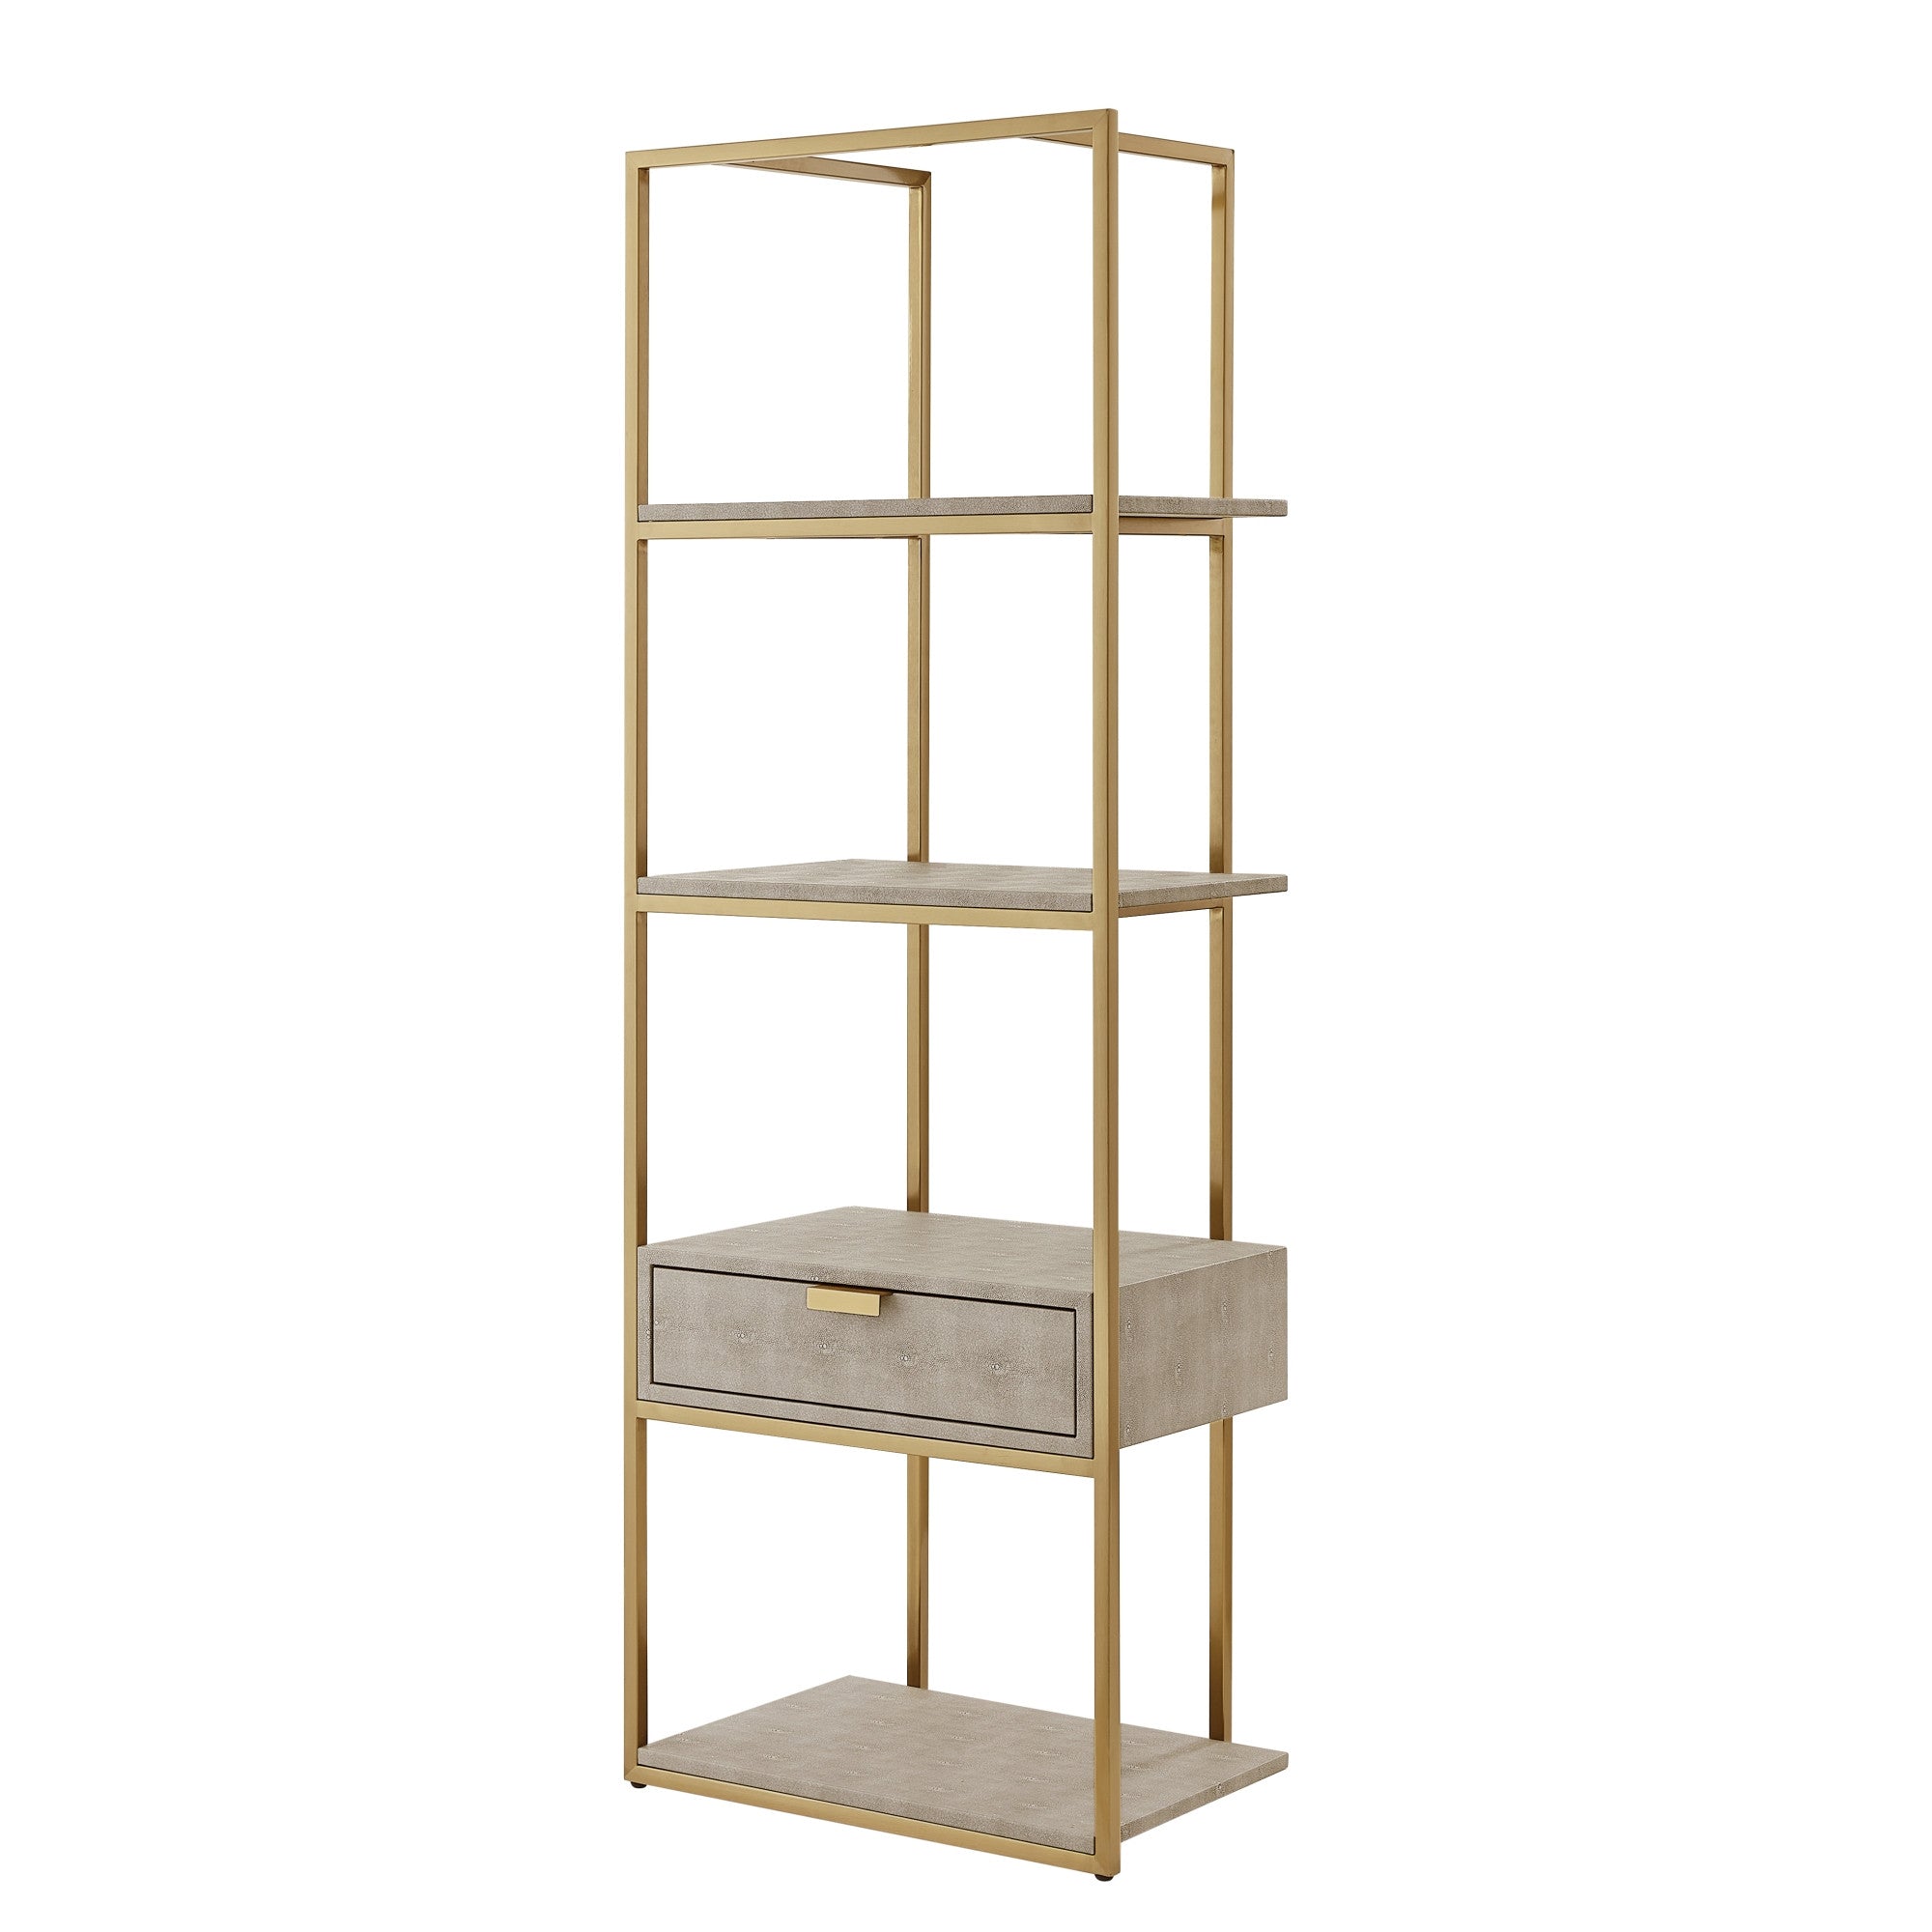 68" Cream Stainless Steel Four Tier Etagere Bookcase with a drawer